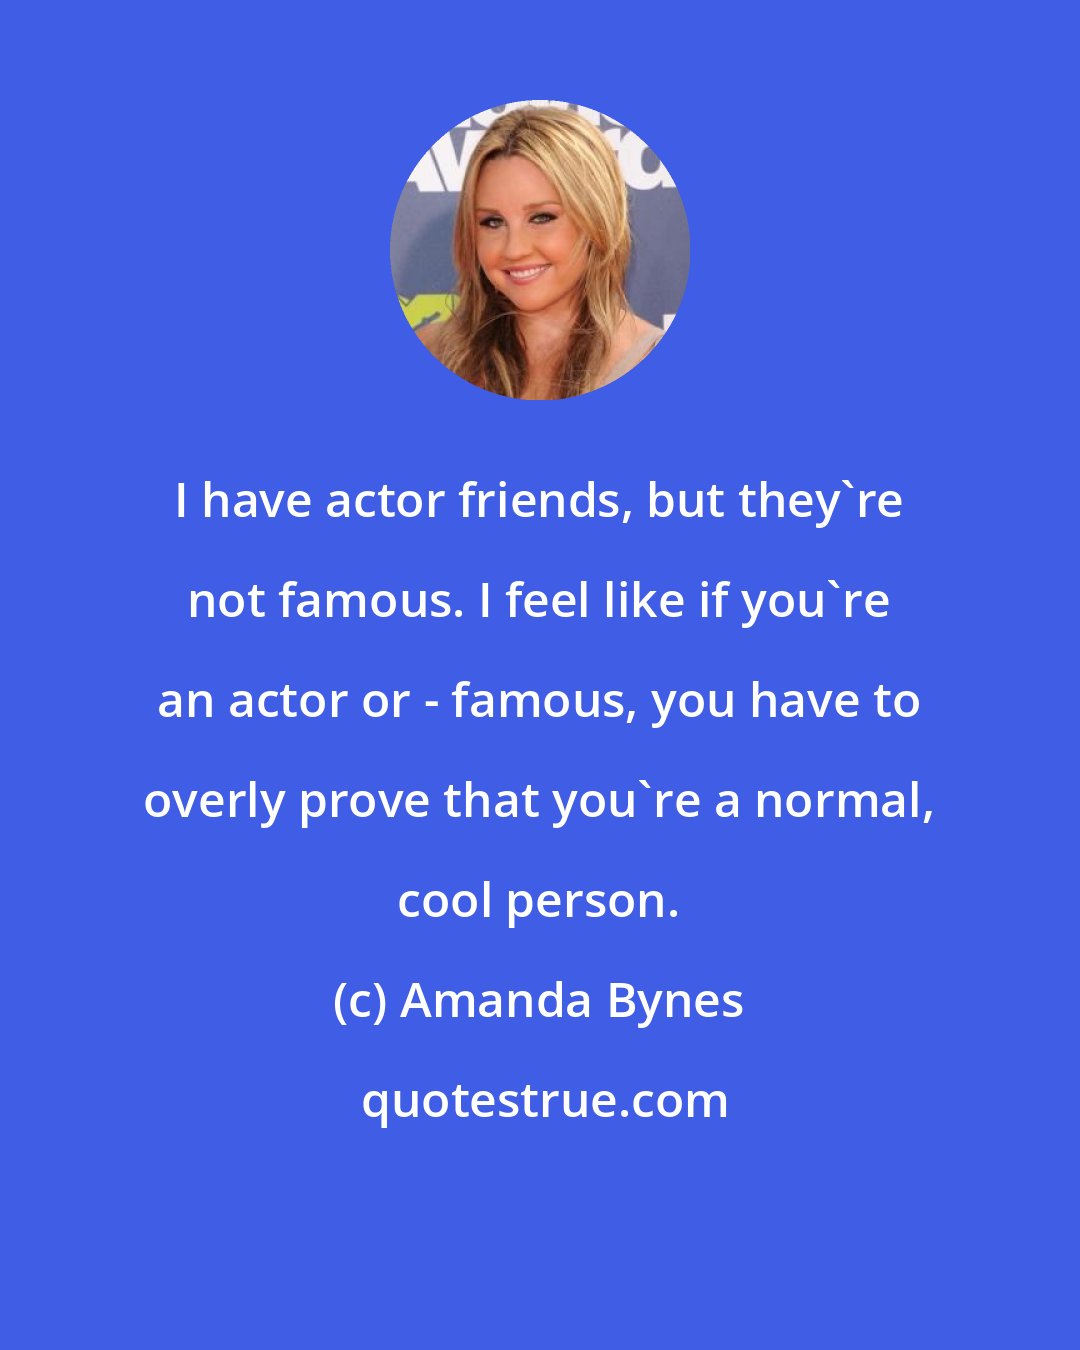 Amanda Bynes: I have actor friends, but they're not famous. I feel like if you're an actor or - famous, you have to overly prove that you're a normal, cool person.